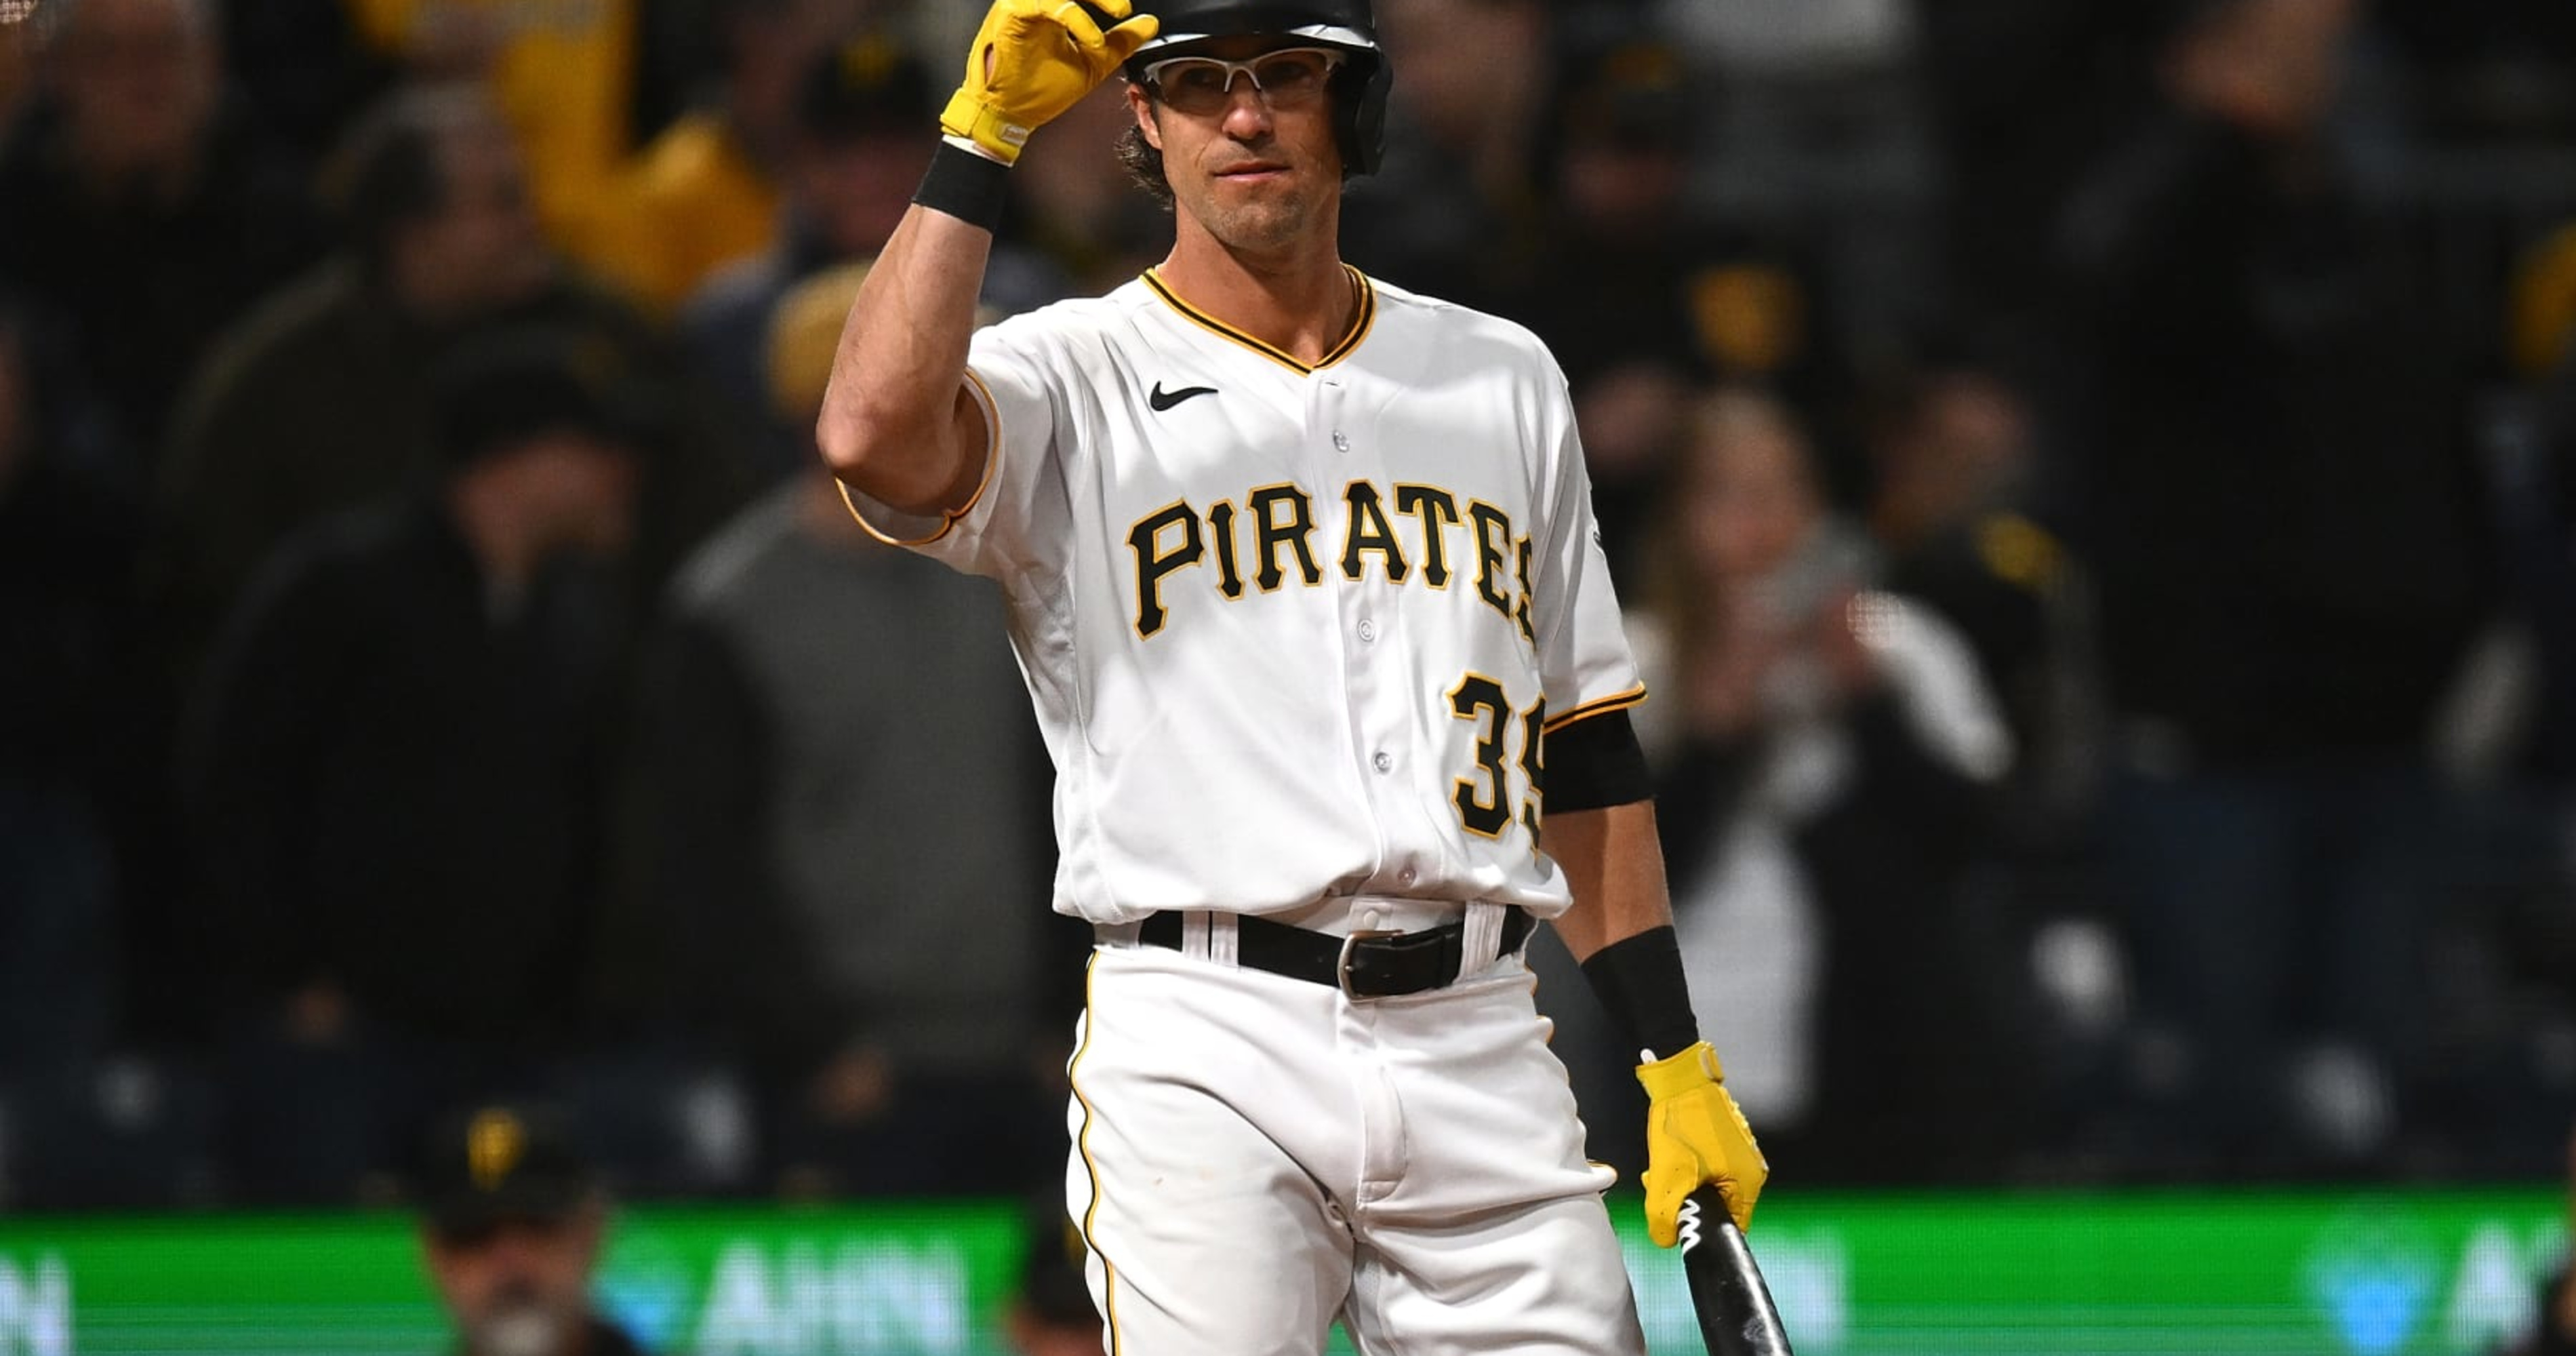 Never give up': Pittsburgh Pirates player makes MLB debut after 13